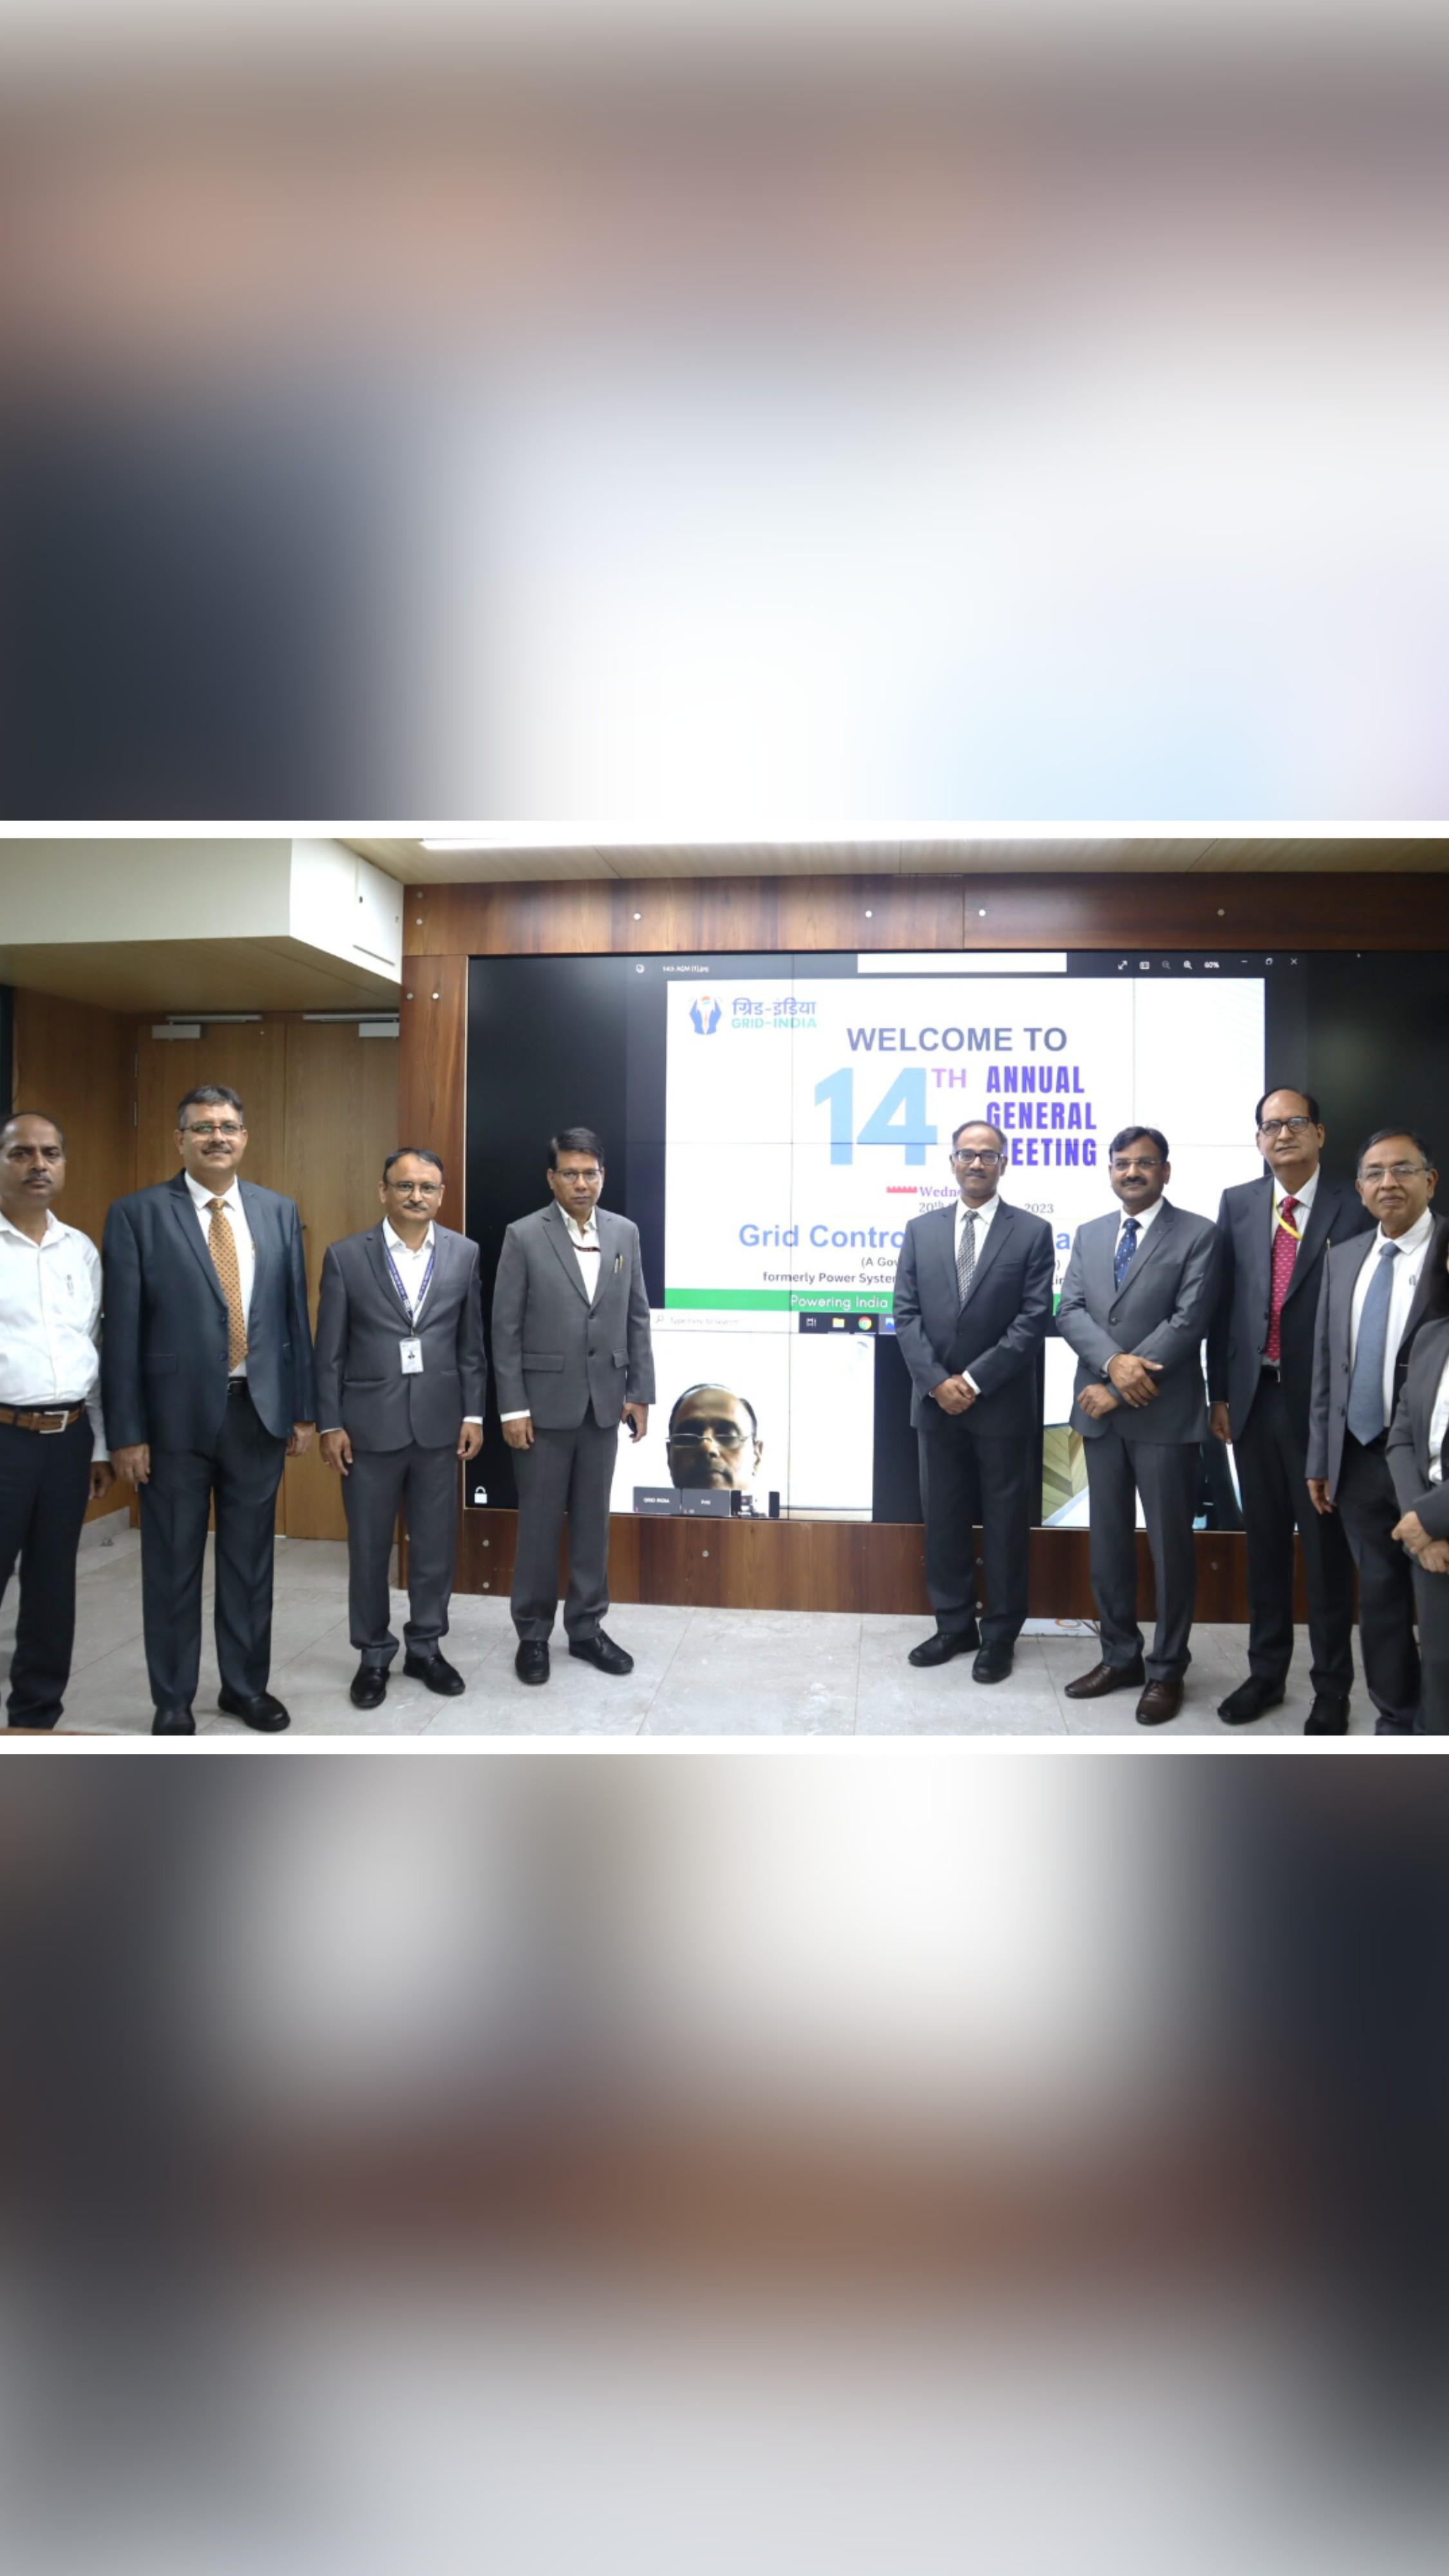 GRID-INDIA successfully concludes 14th Annual General Meeting

